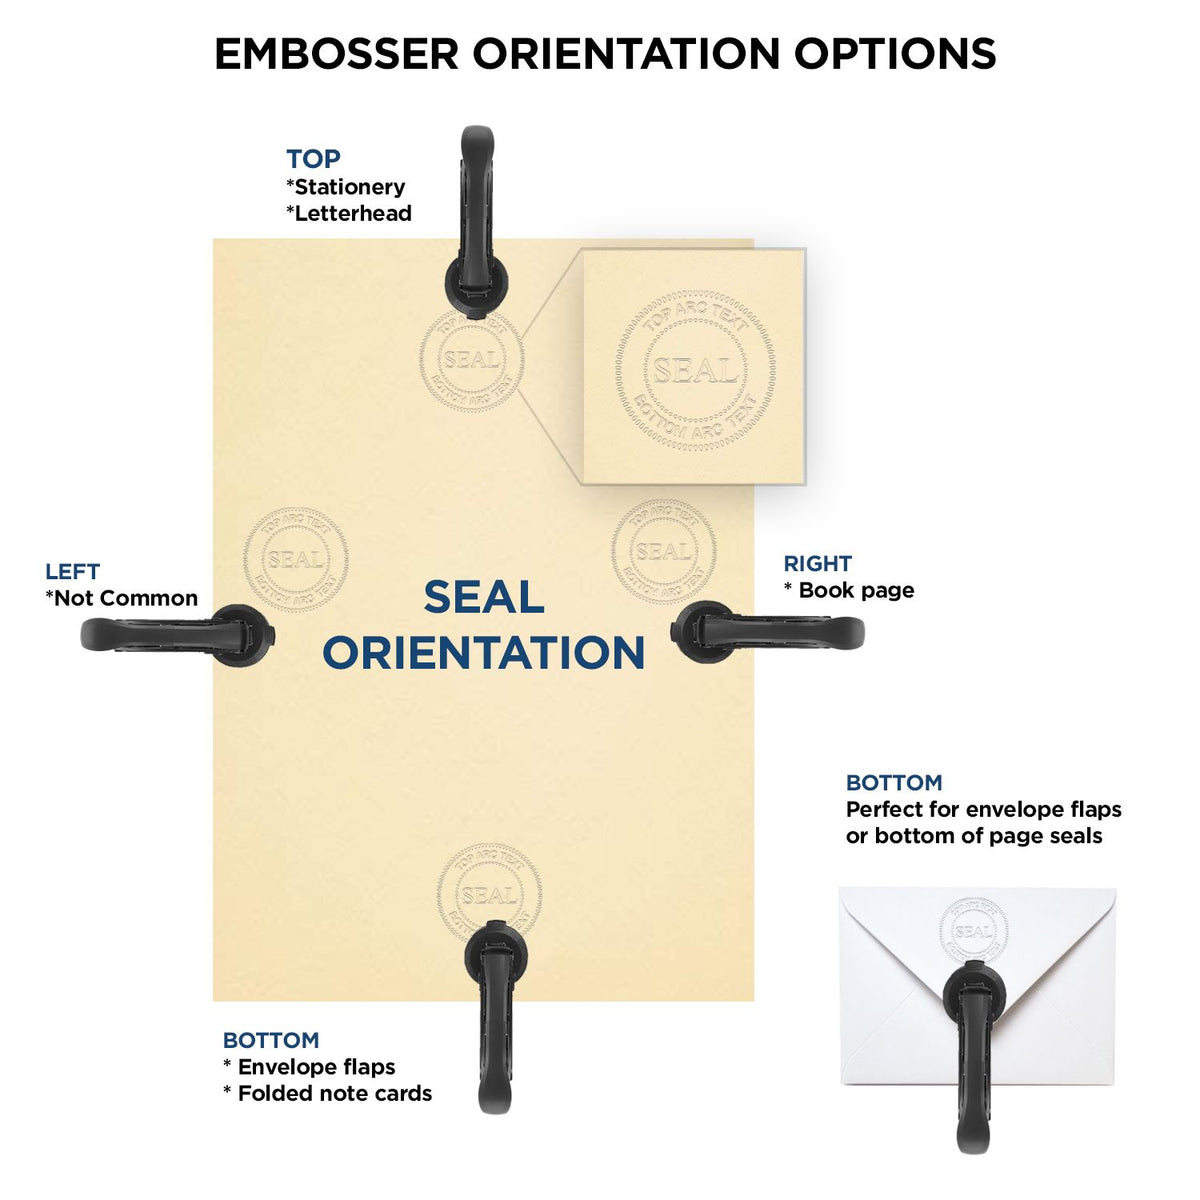 An infographic for the Handheld Wisconsin Professional Geologist Embosser showing embosser orientation, this is showing examples of a top, bottom, right and left insert.